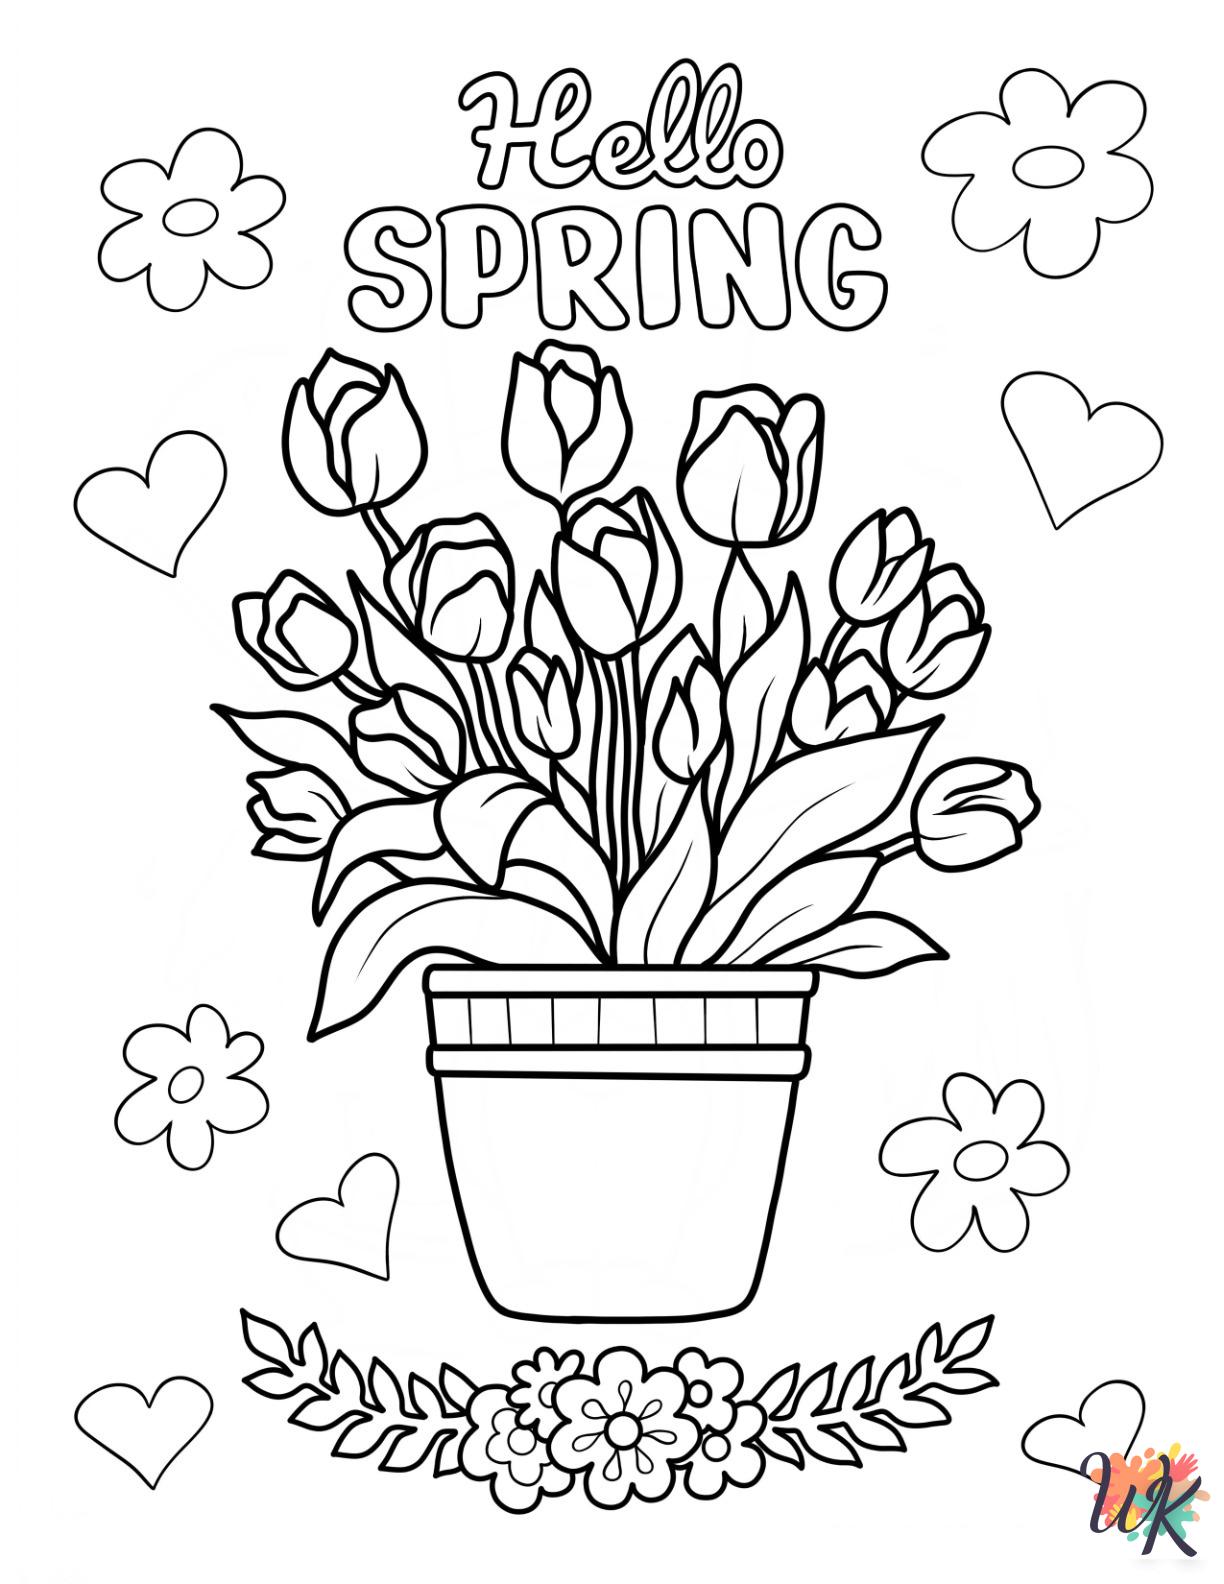 free full size printable Spring coloring pages for adults pdf